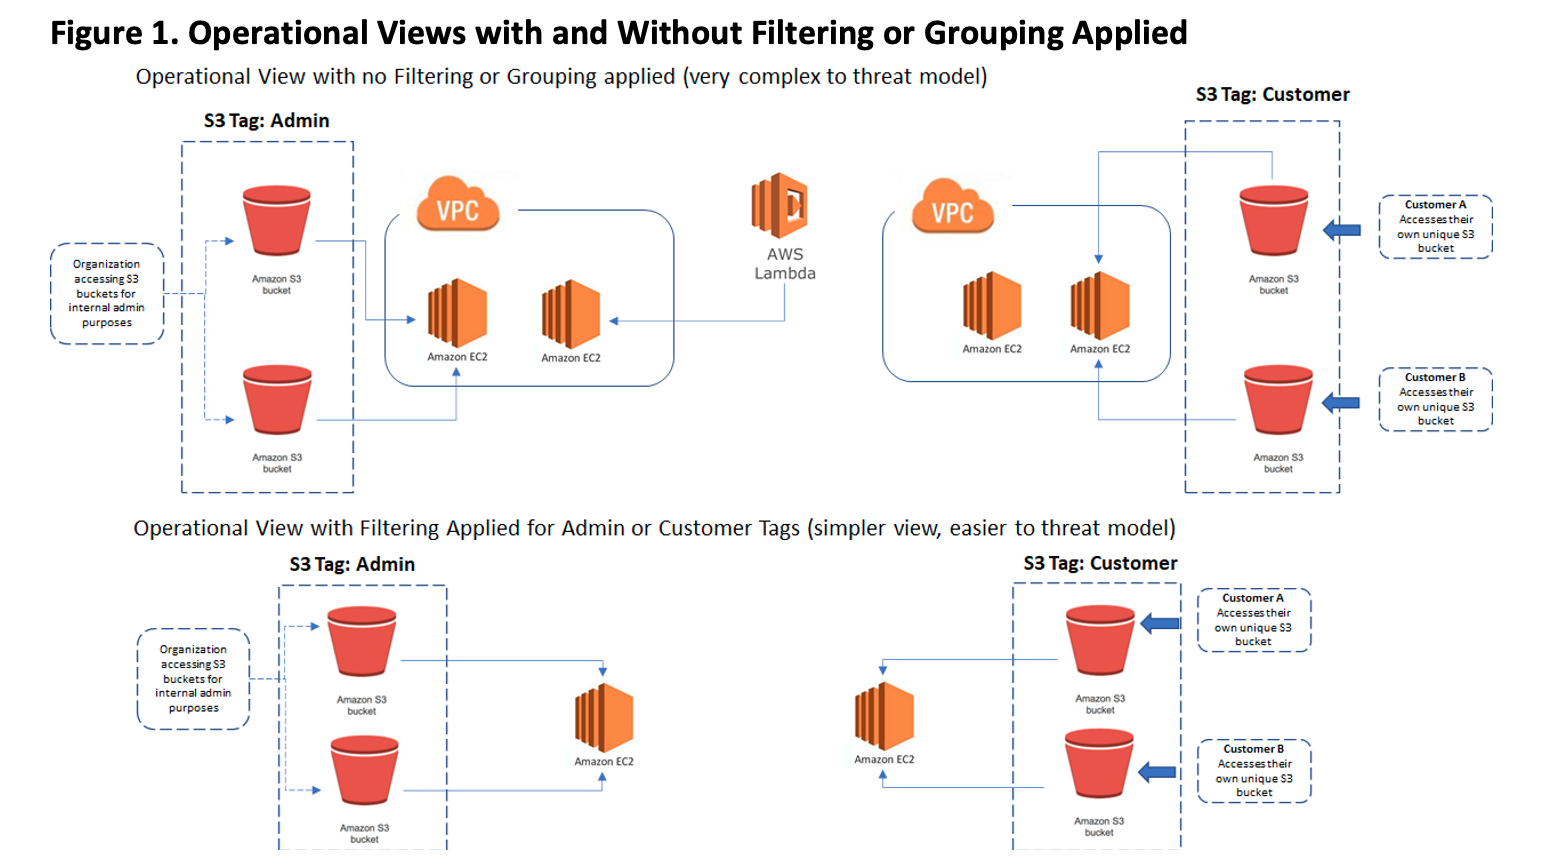 Figure 1. Operational Views with and Without Filtering or Grouping Applied